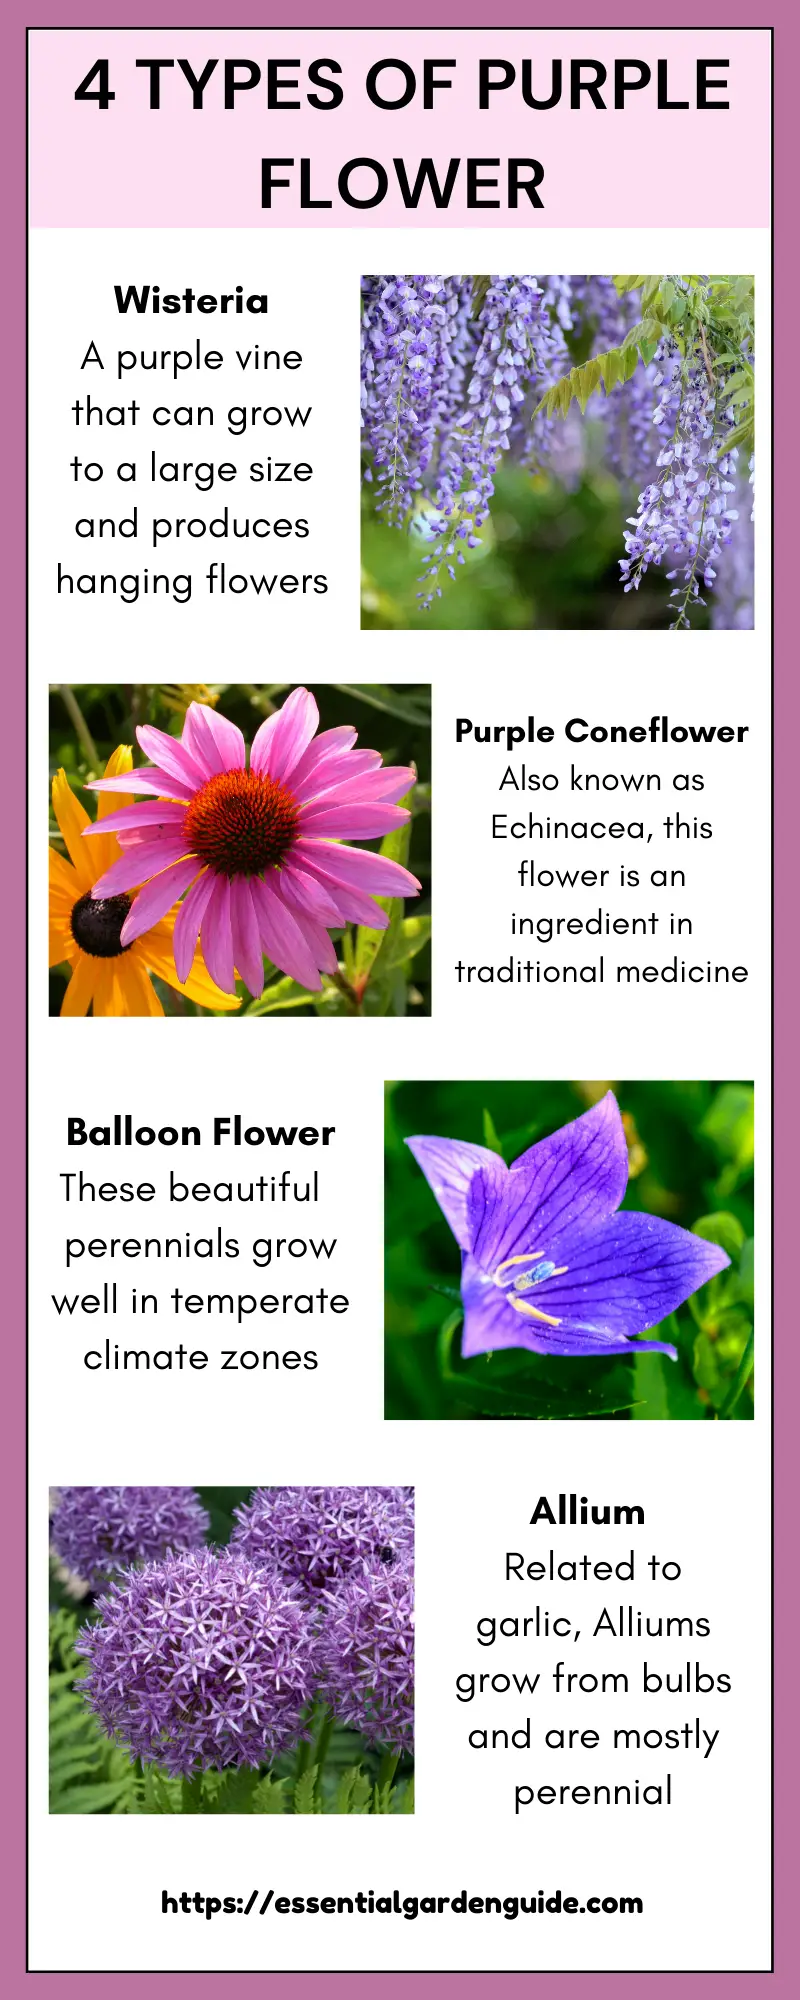 Infographic: 4 Types of Purple Flower.